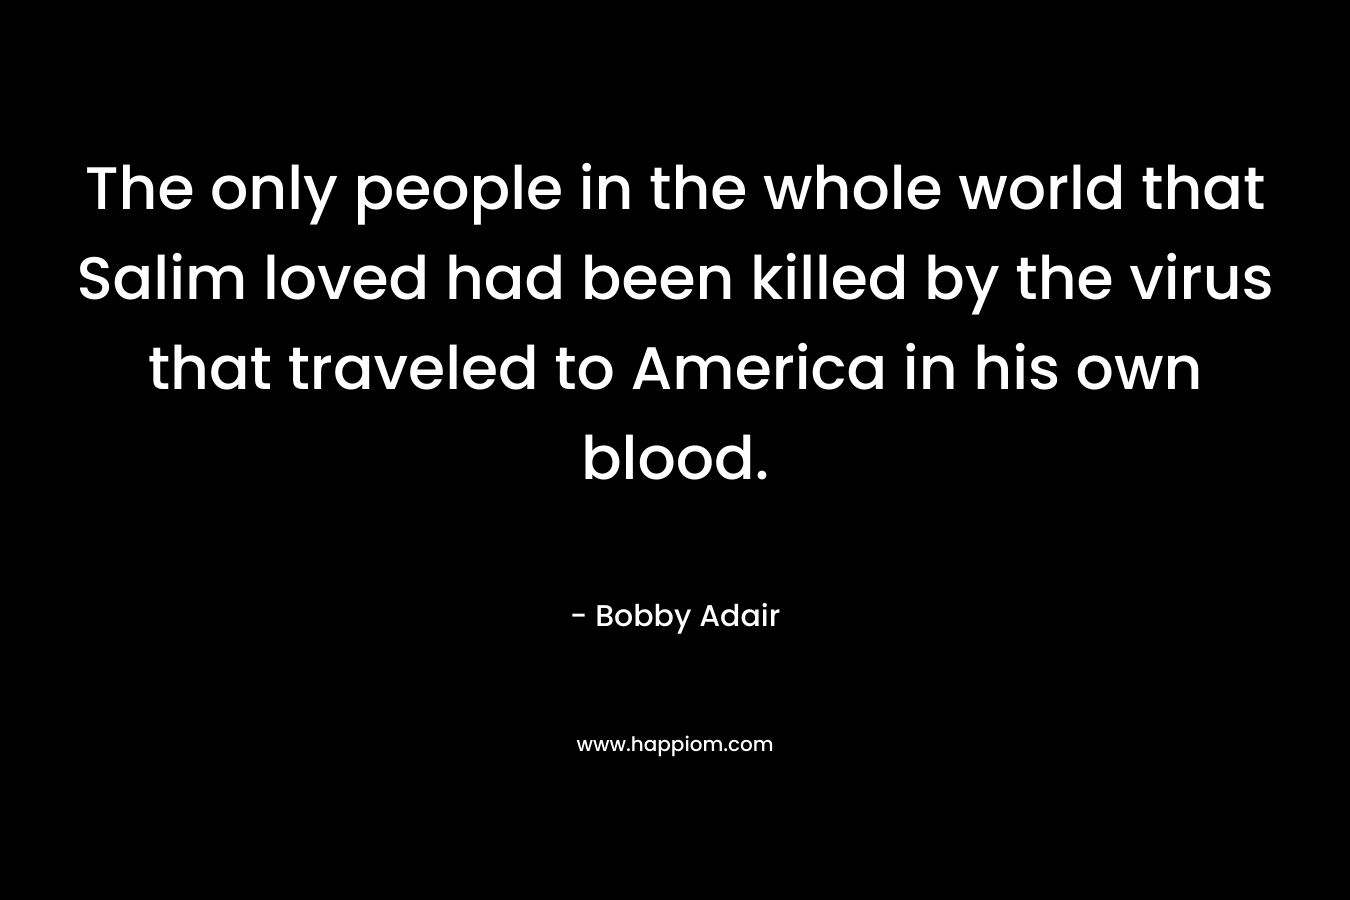 The only people in the whole world that Salim loved had been killed by the virus that traveled to America in his own blood. – Bobby Adair